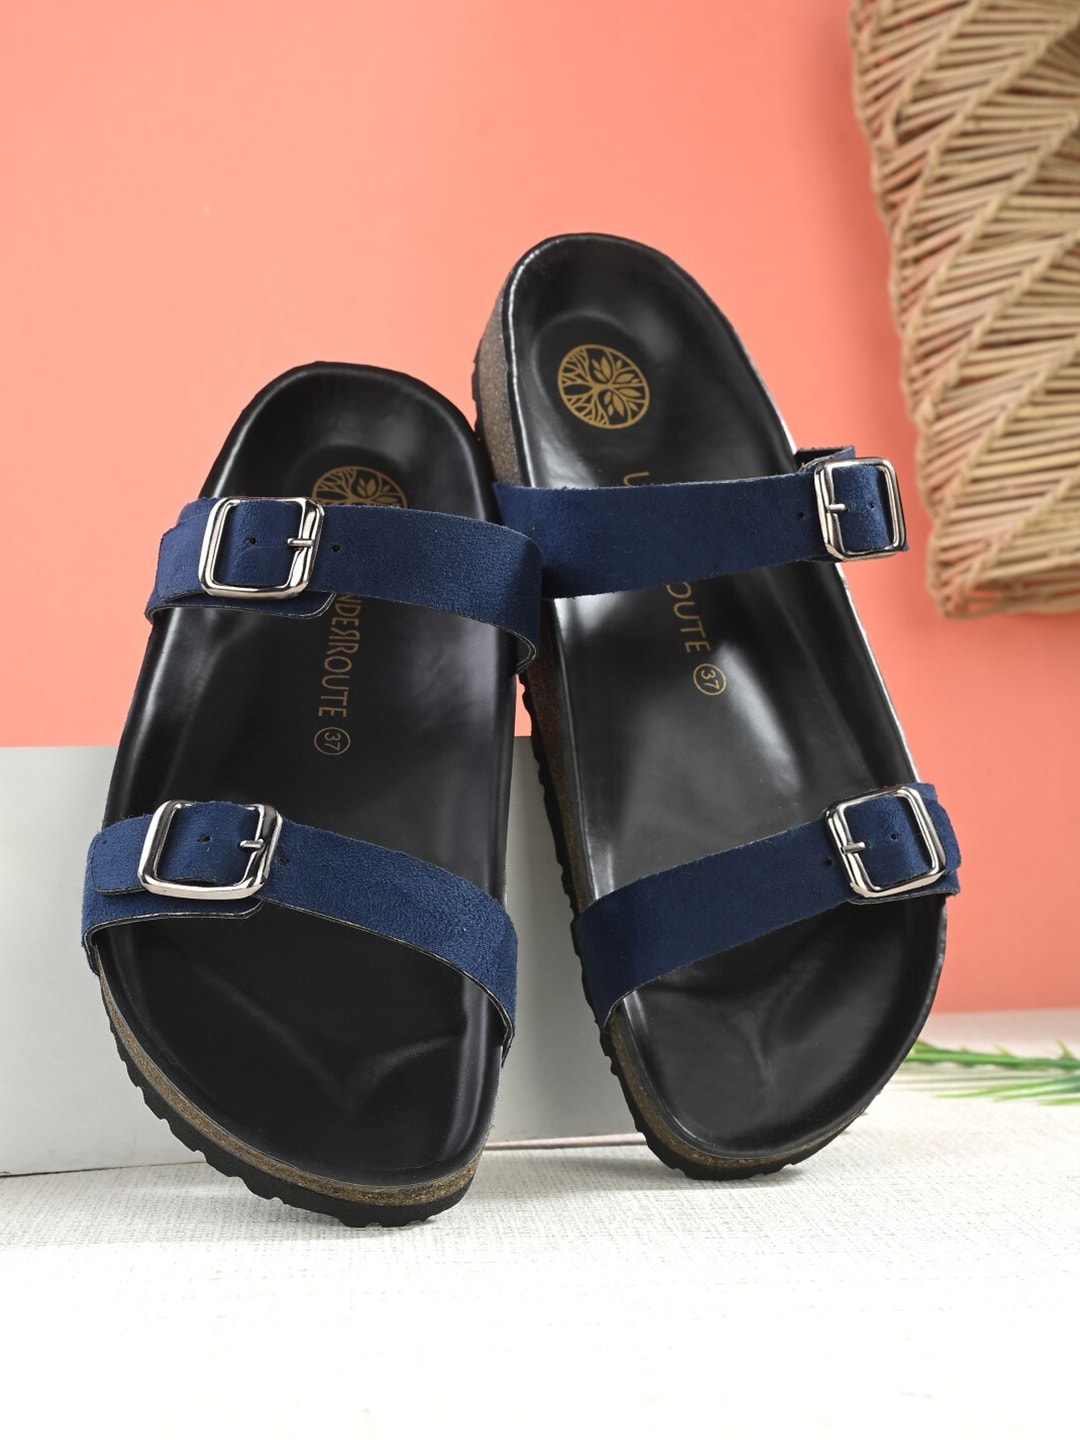 UNDERROUTE Buckled Lightweight Open Toe Flats Price in India